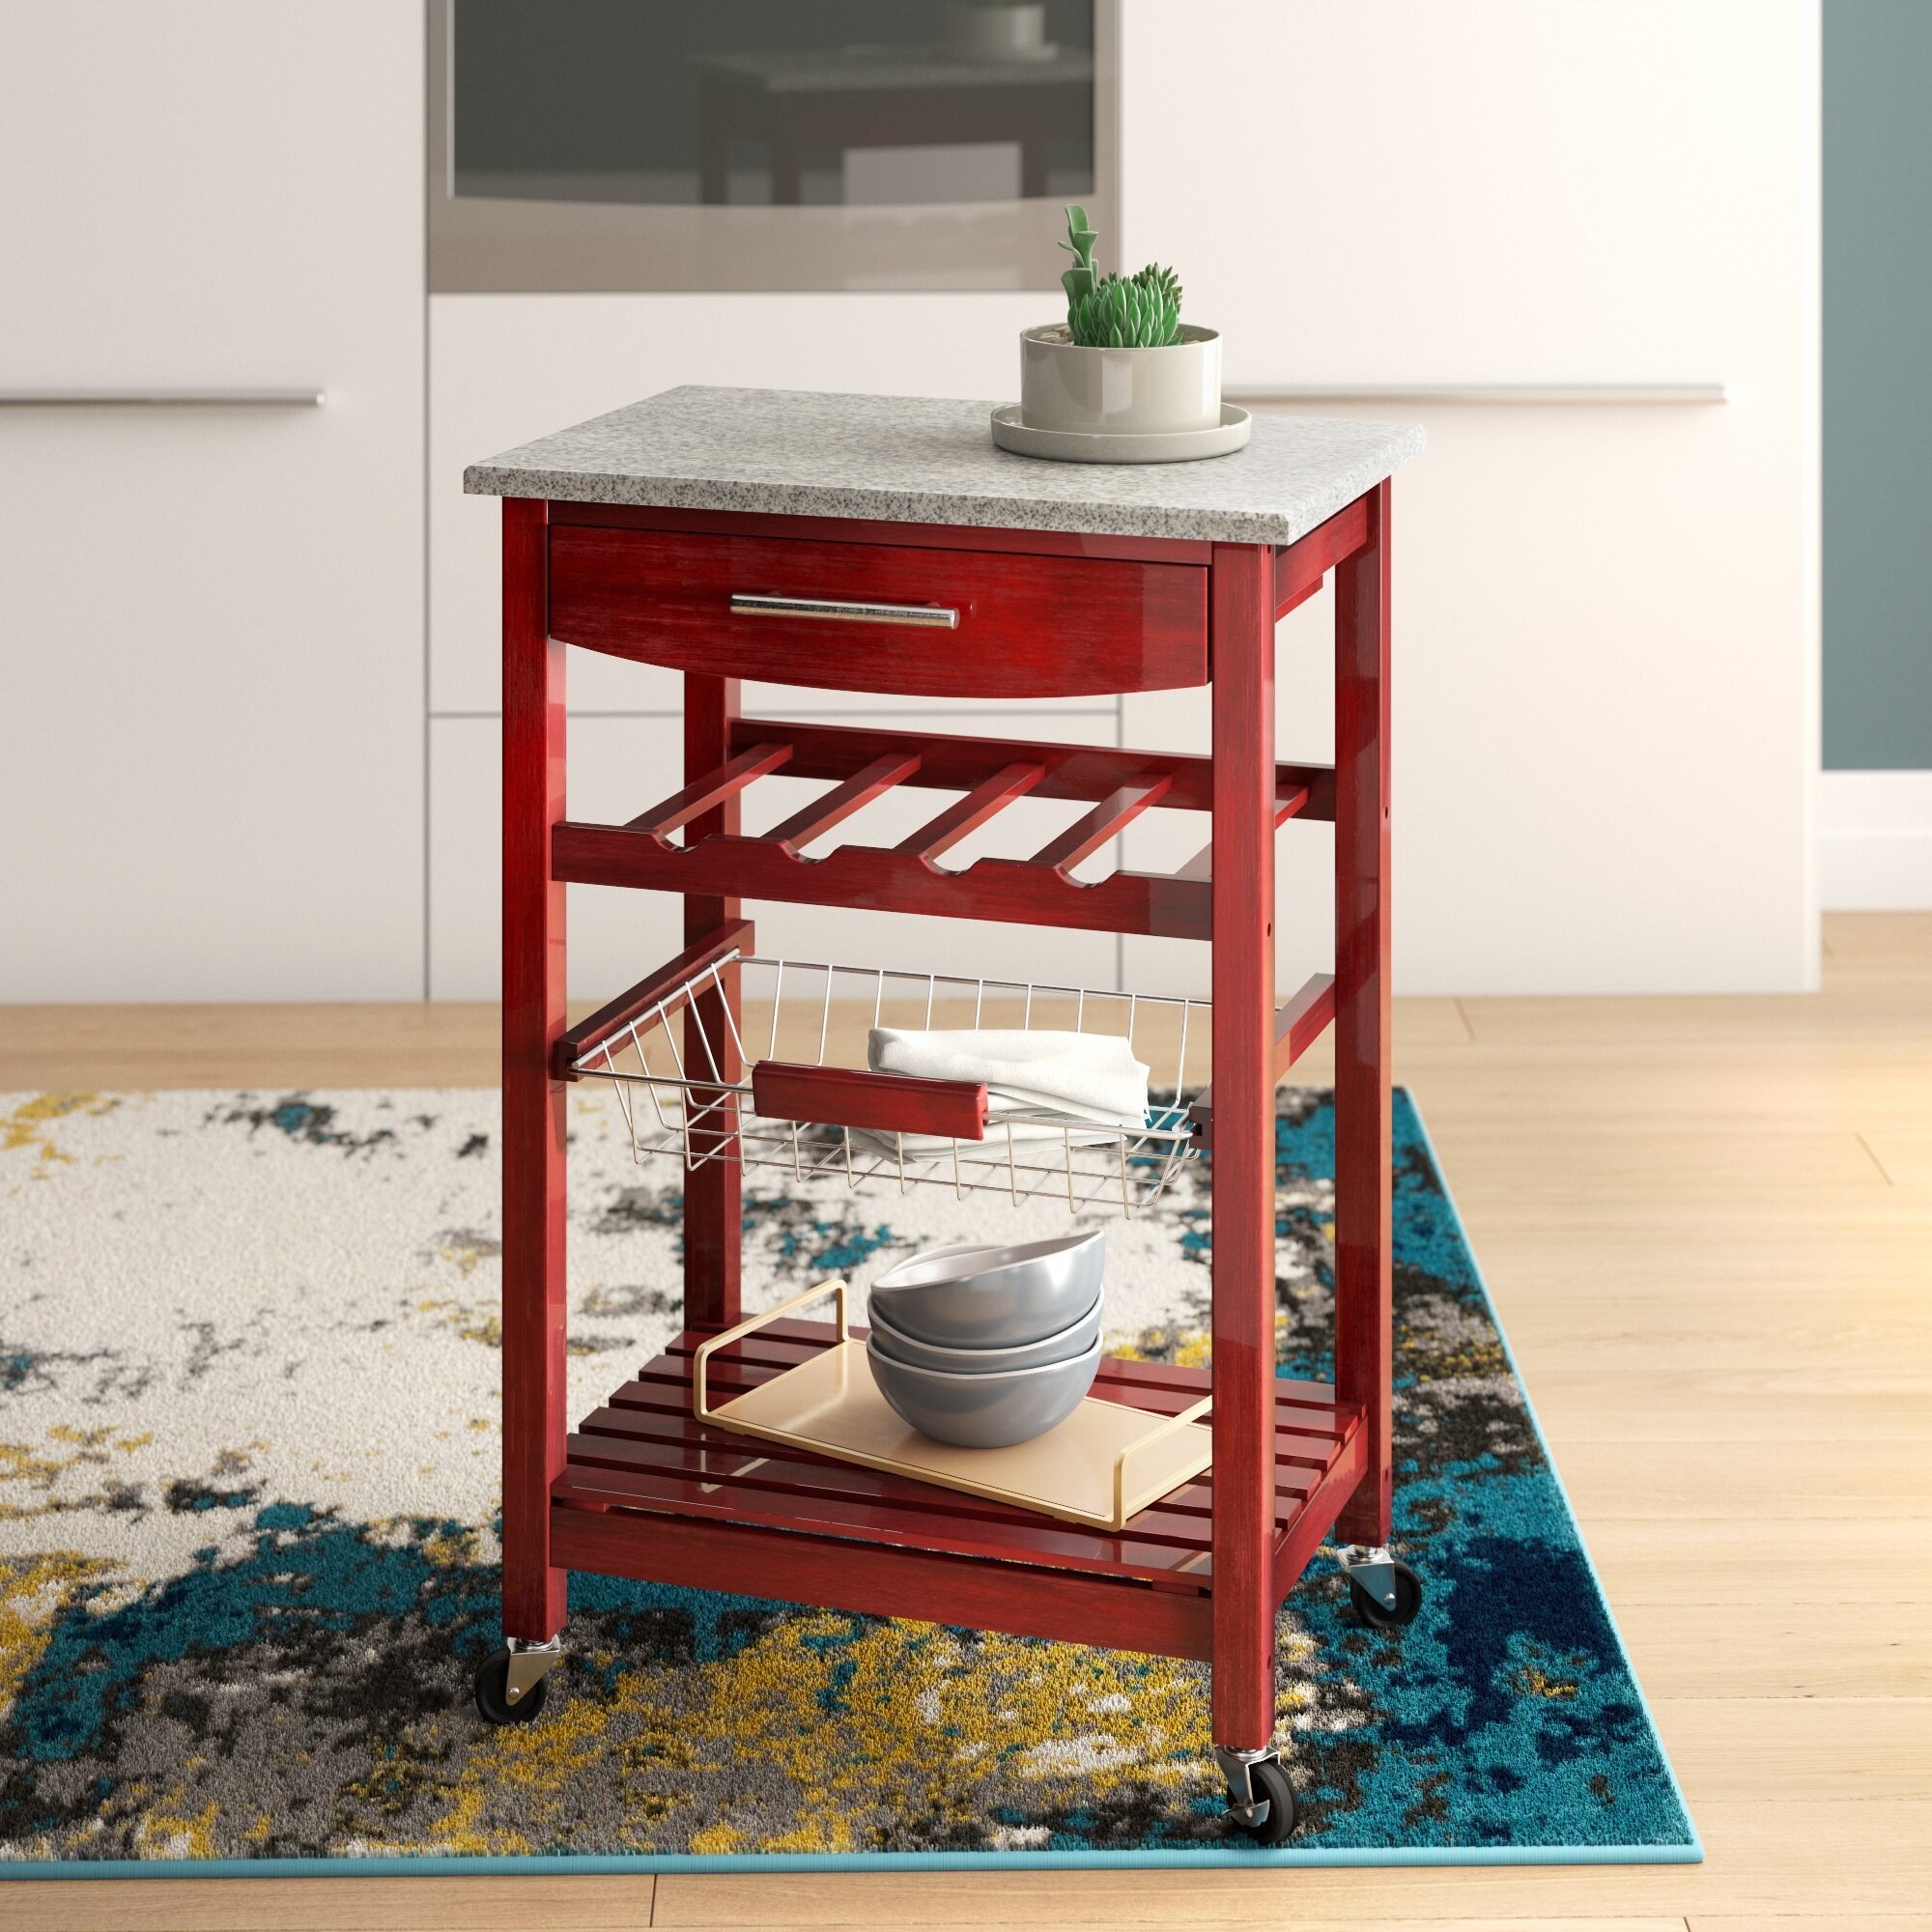 A red wooden kitchen cart with a marble countertop.